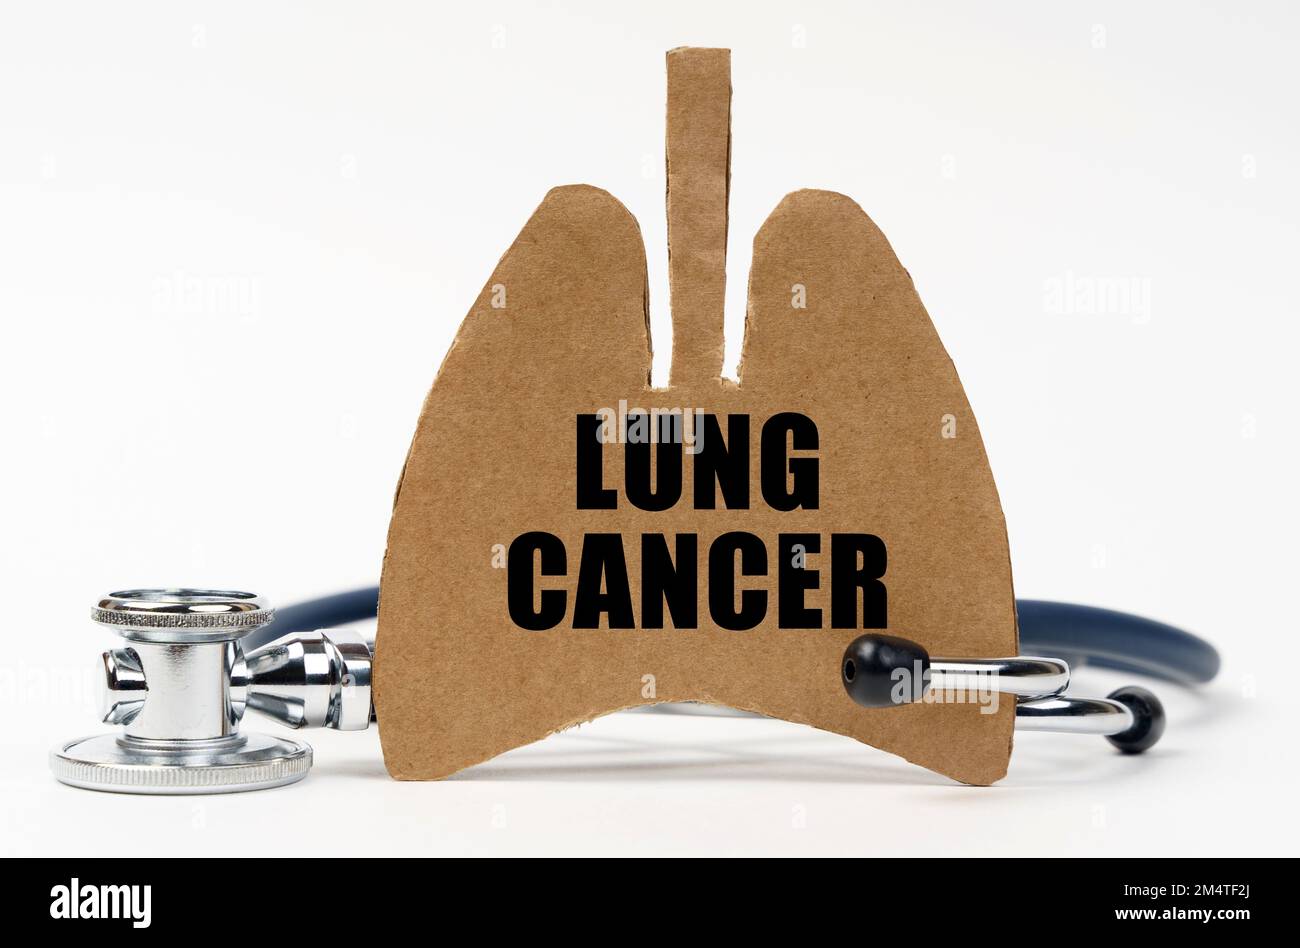 Medical concept. On a white surface are a stethoscope and a cardboard figure of a lung with the inscription - LUNG CANCER Stock Photo